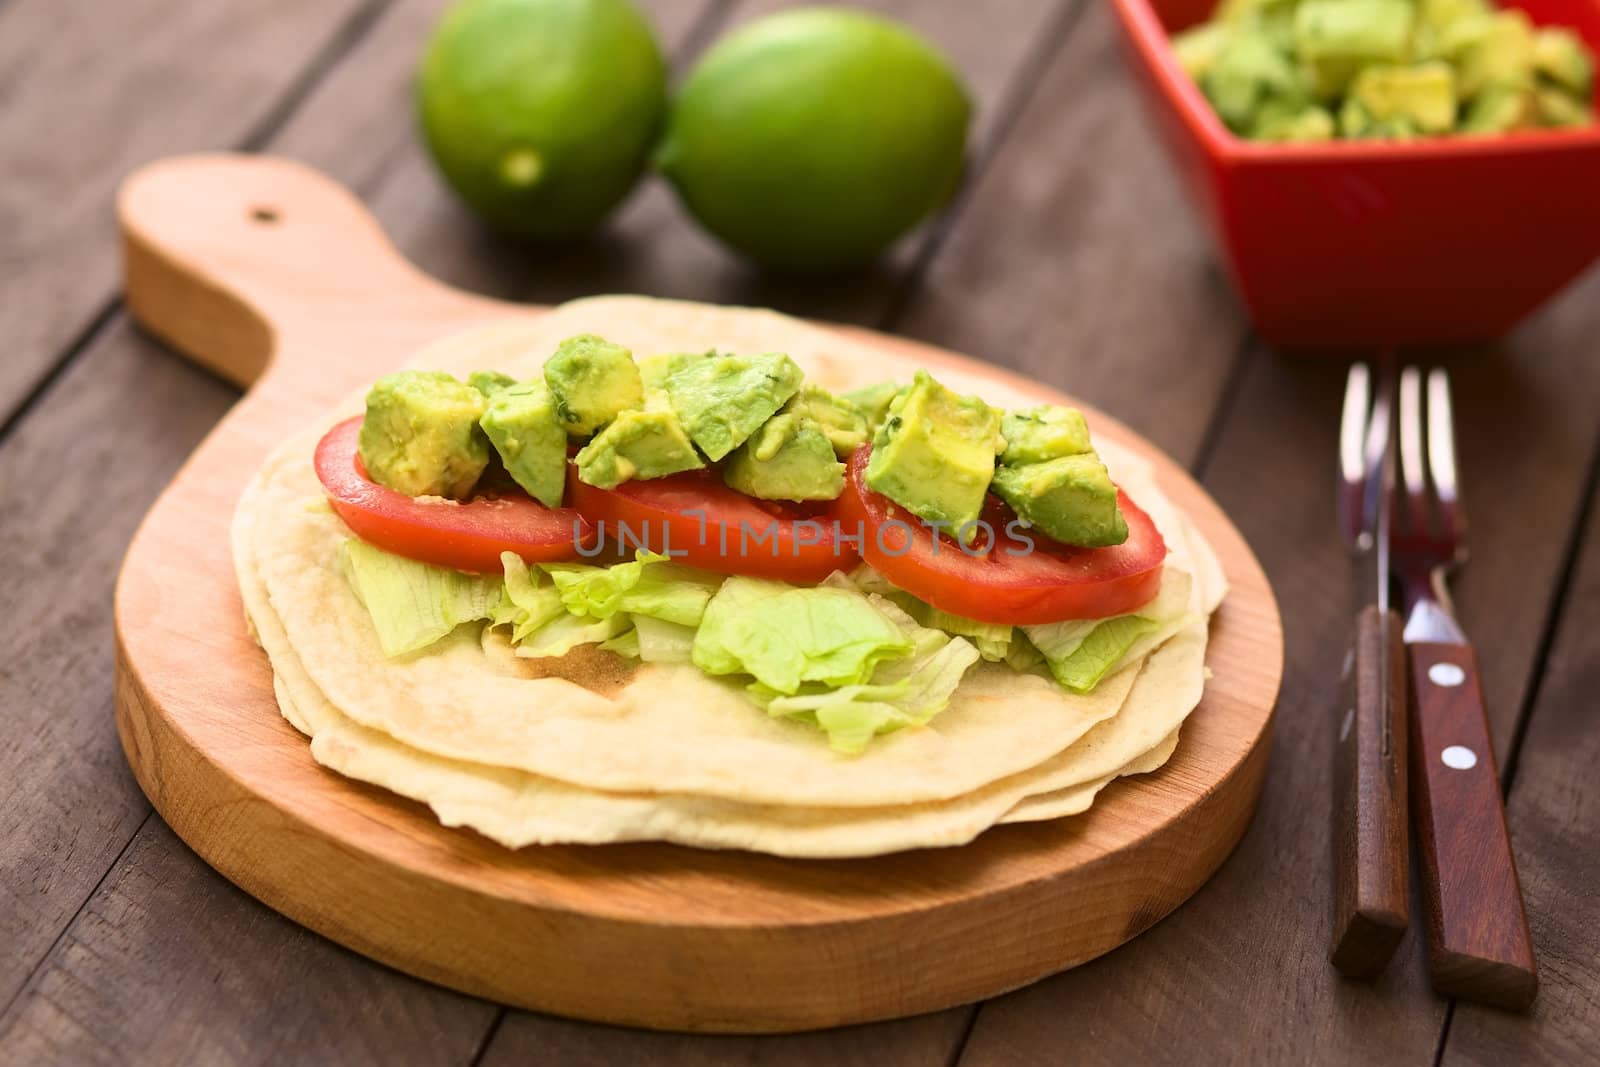 Fresh homemade tortilla with lettuce, tomato and avocado on wooden board (Selective Focus, Focus on the front of the avocado pieces on top)